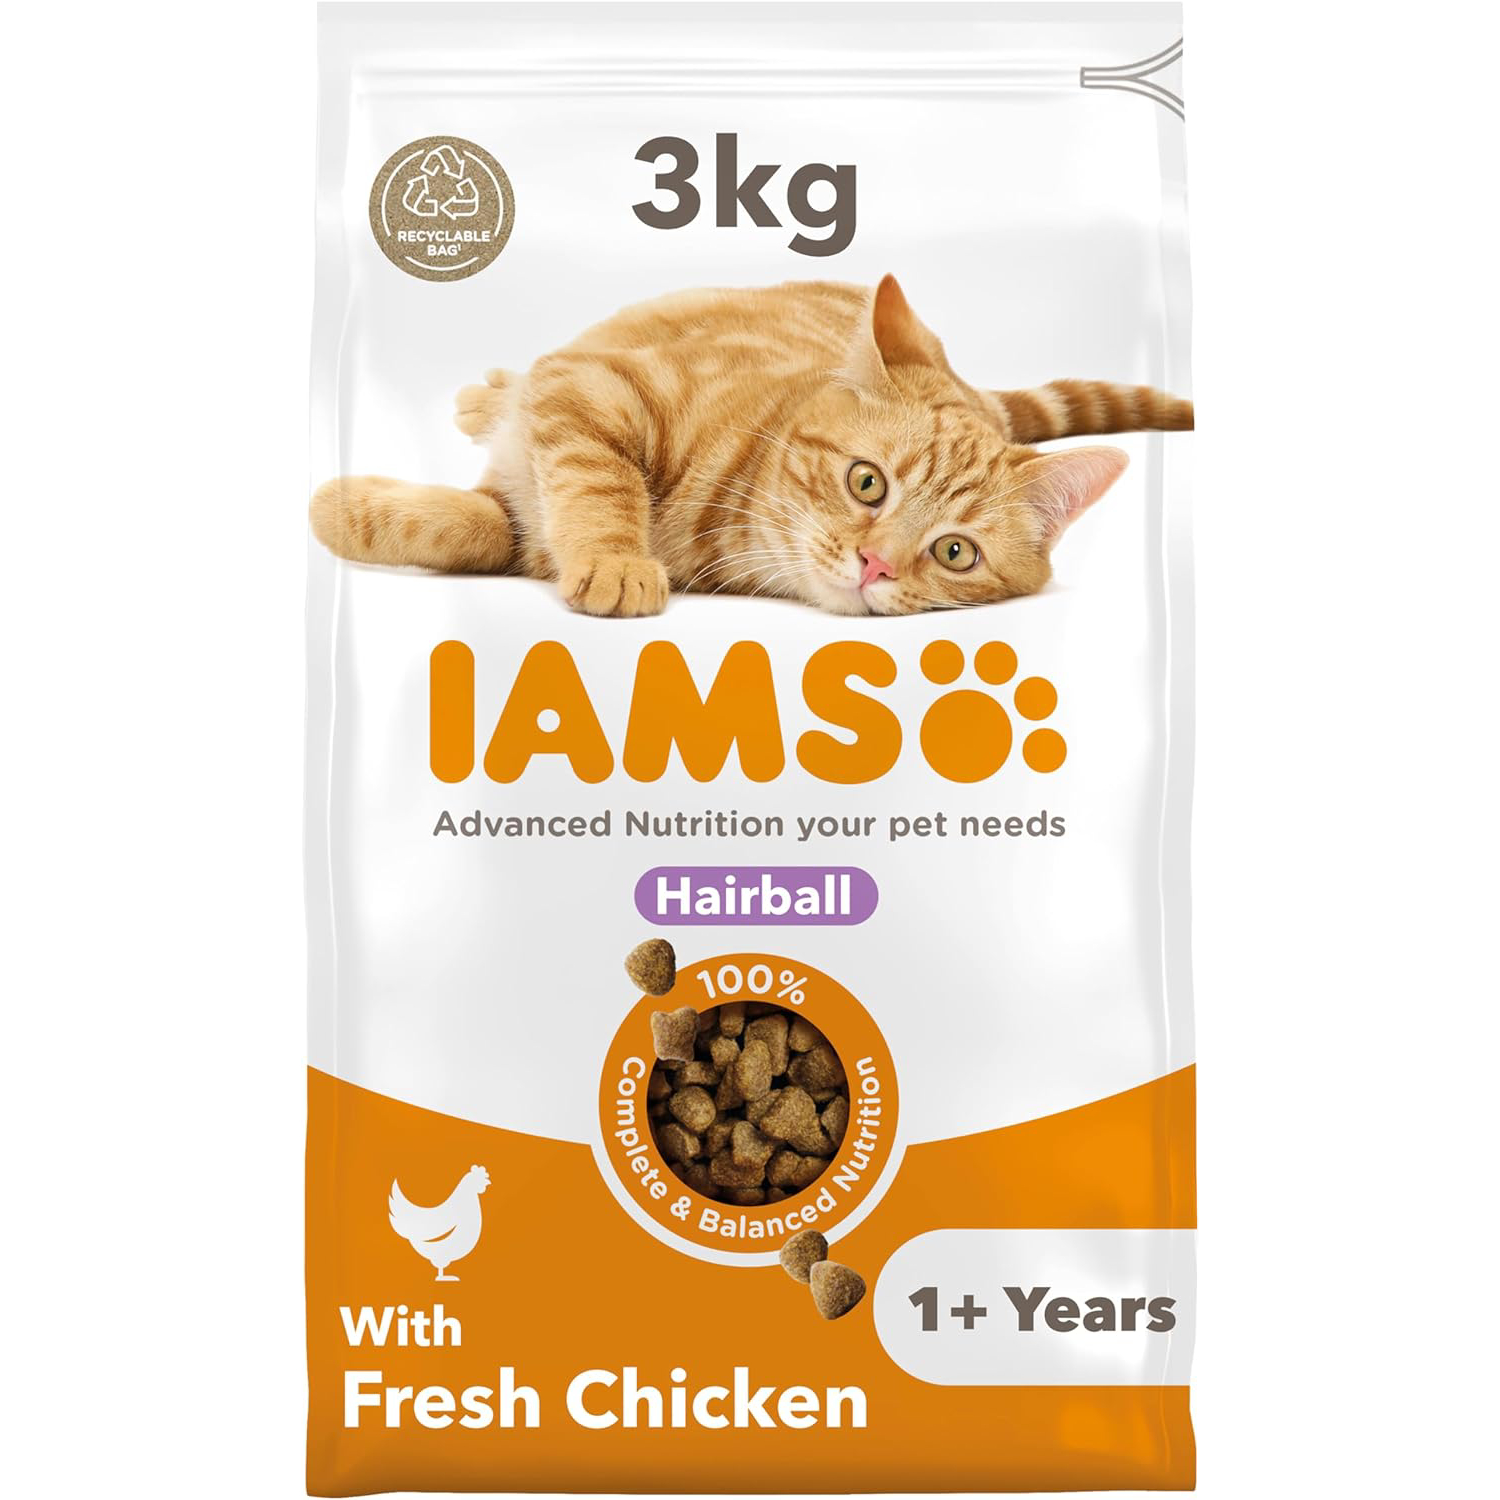 IAMS Hairball Complete Dry Cat Food for Adult and Senior Cats with Chicken